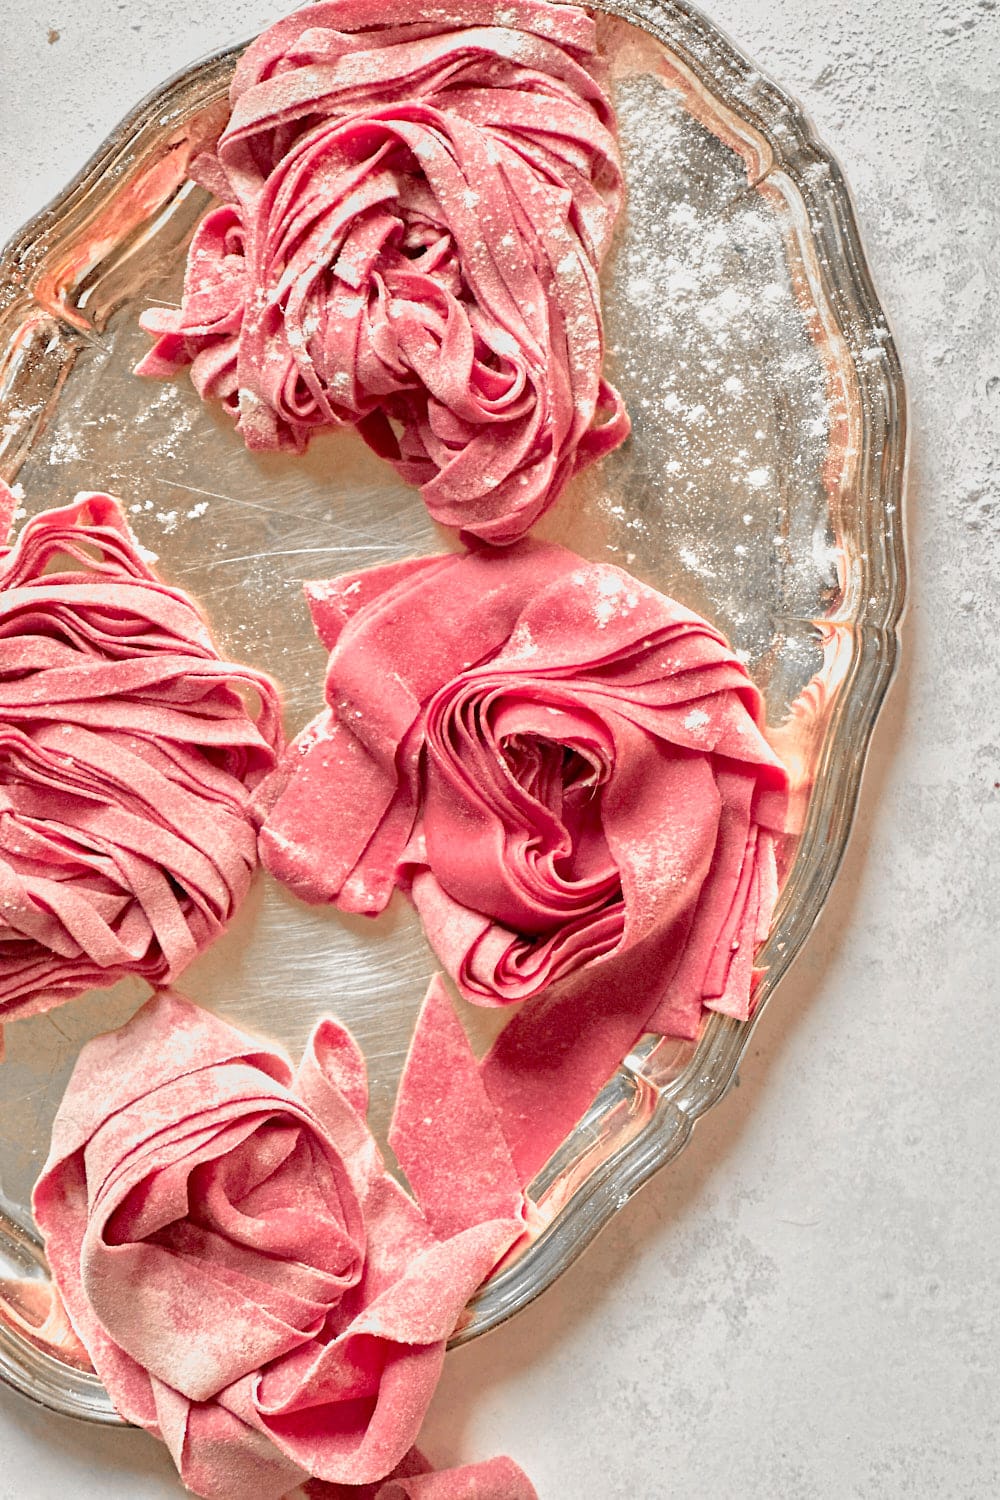 Fresh pink pasta nests made with homemade beet pasta dough.